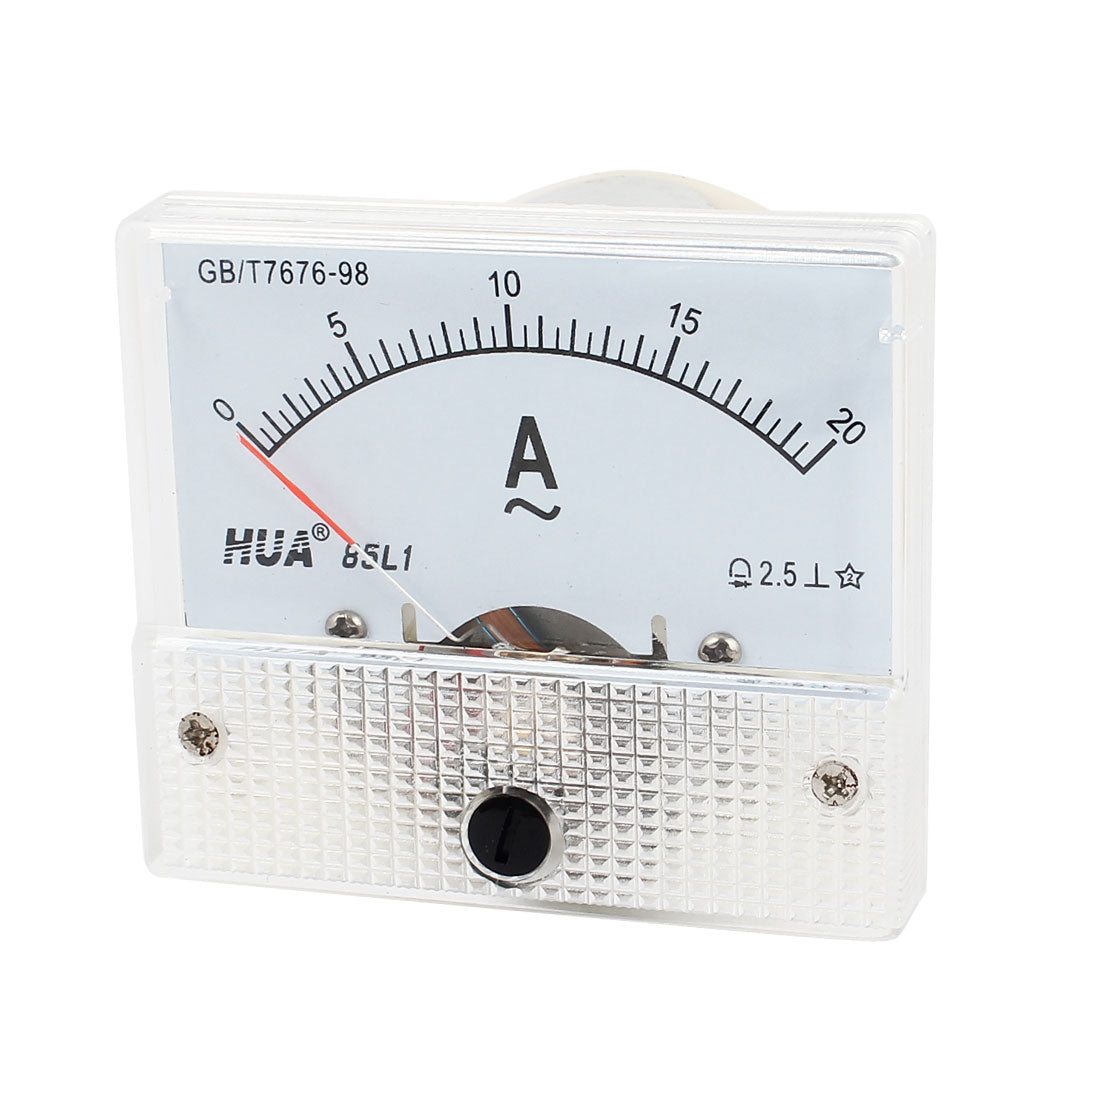 uxcell Uxcell AC 0-20A Rectangle Analog Panel Ammeter Gauge 85L1-A